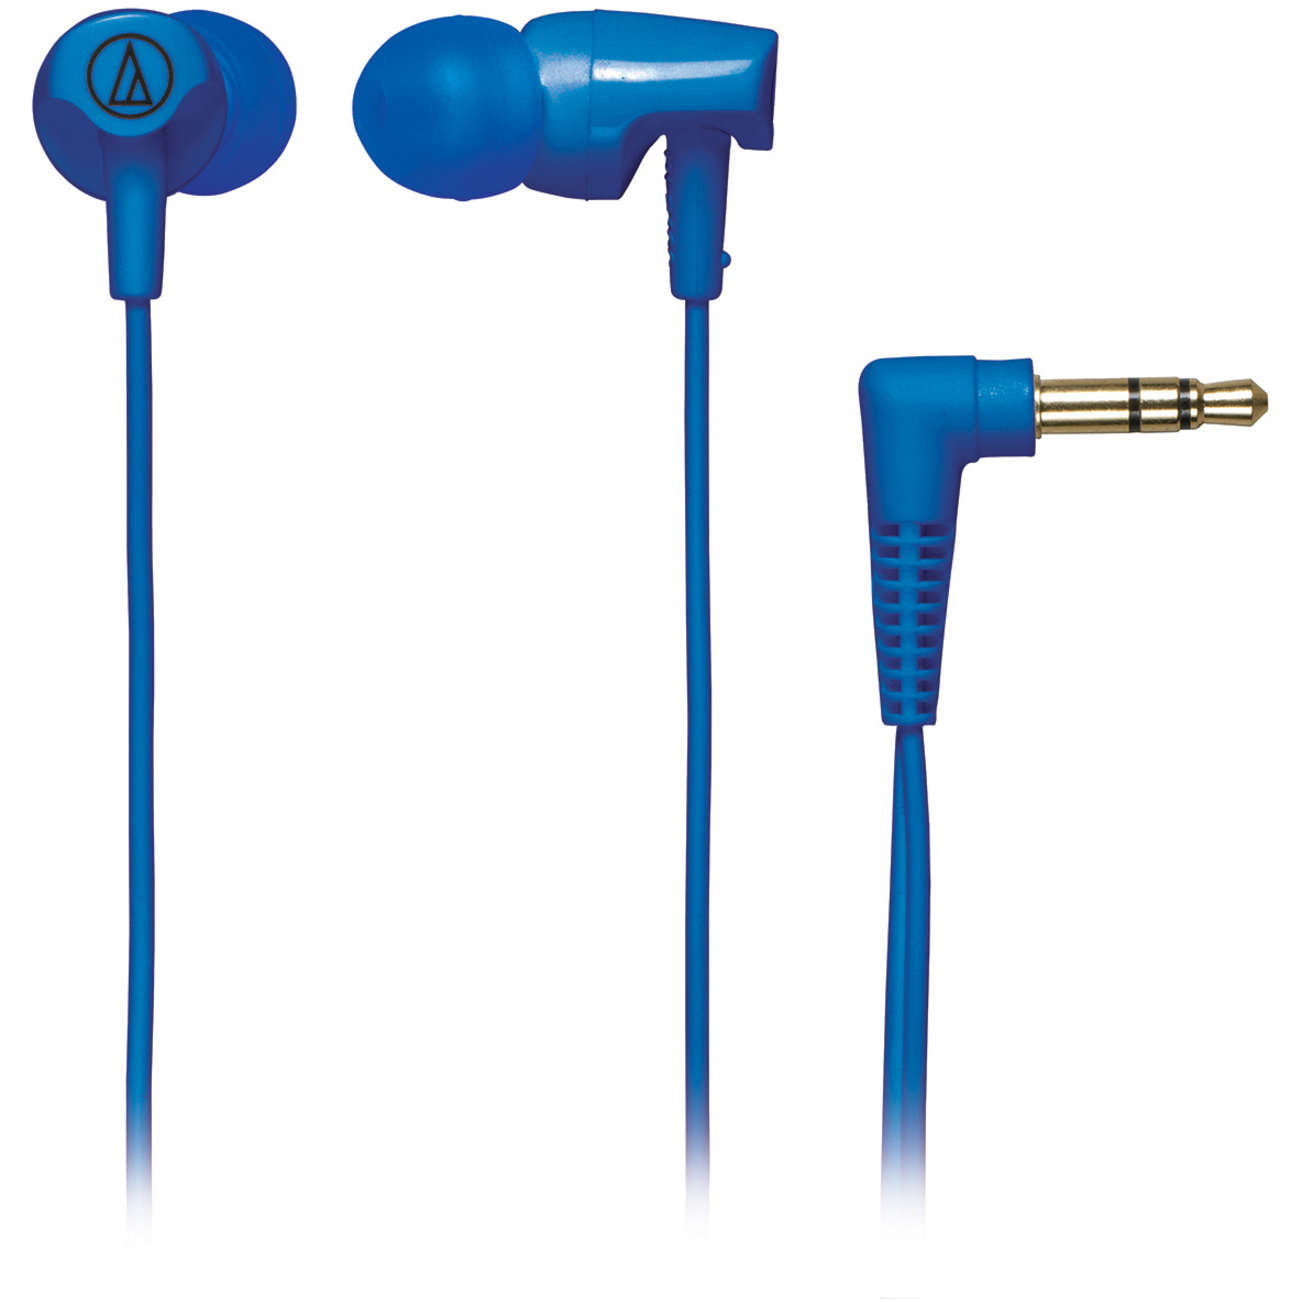 Audio-Technica Clear Earbuds Blue, ATH-CLR100 - image 1 of 2